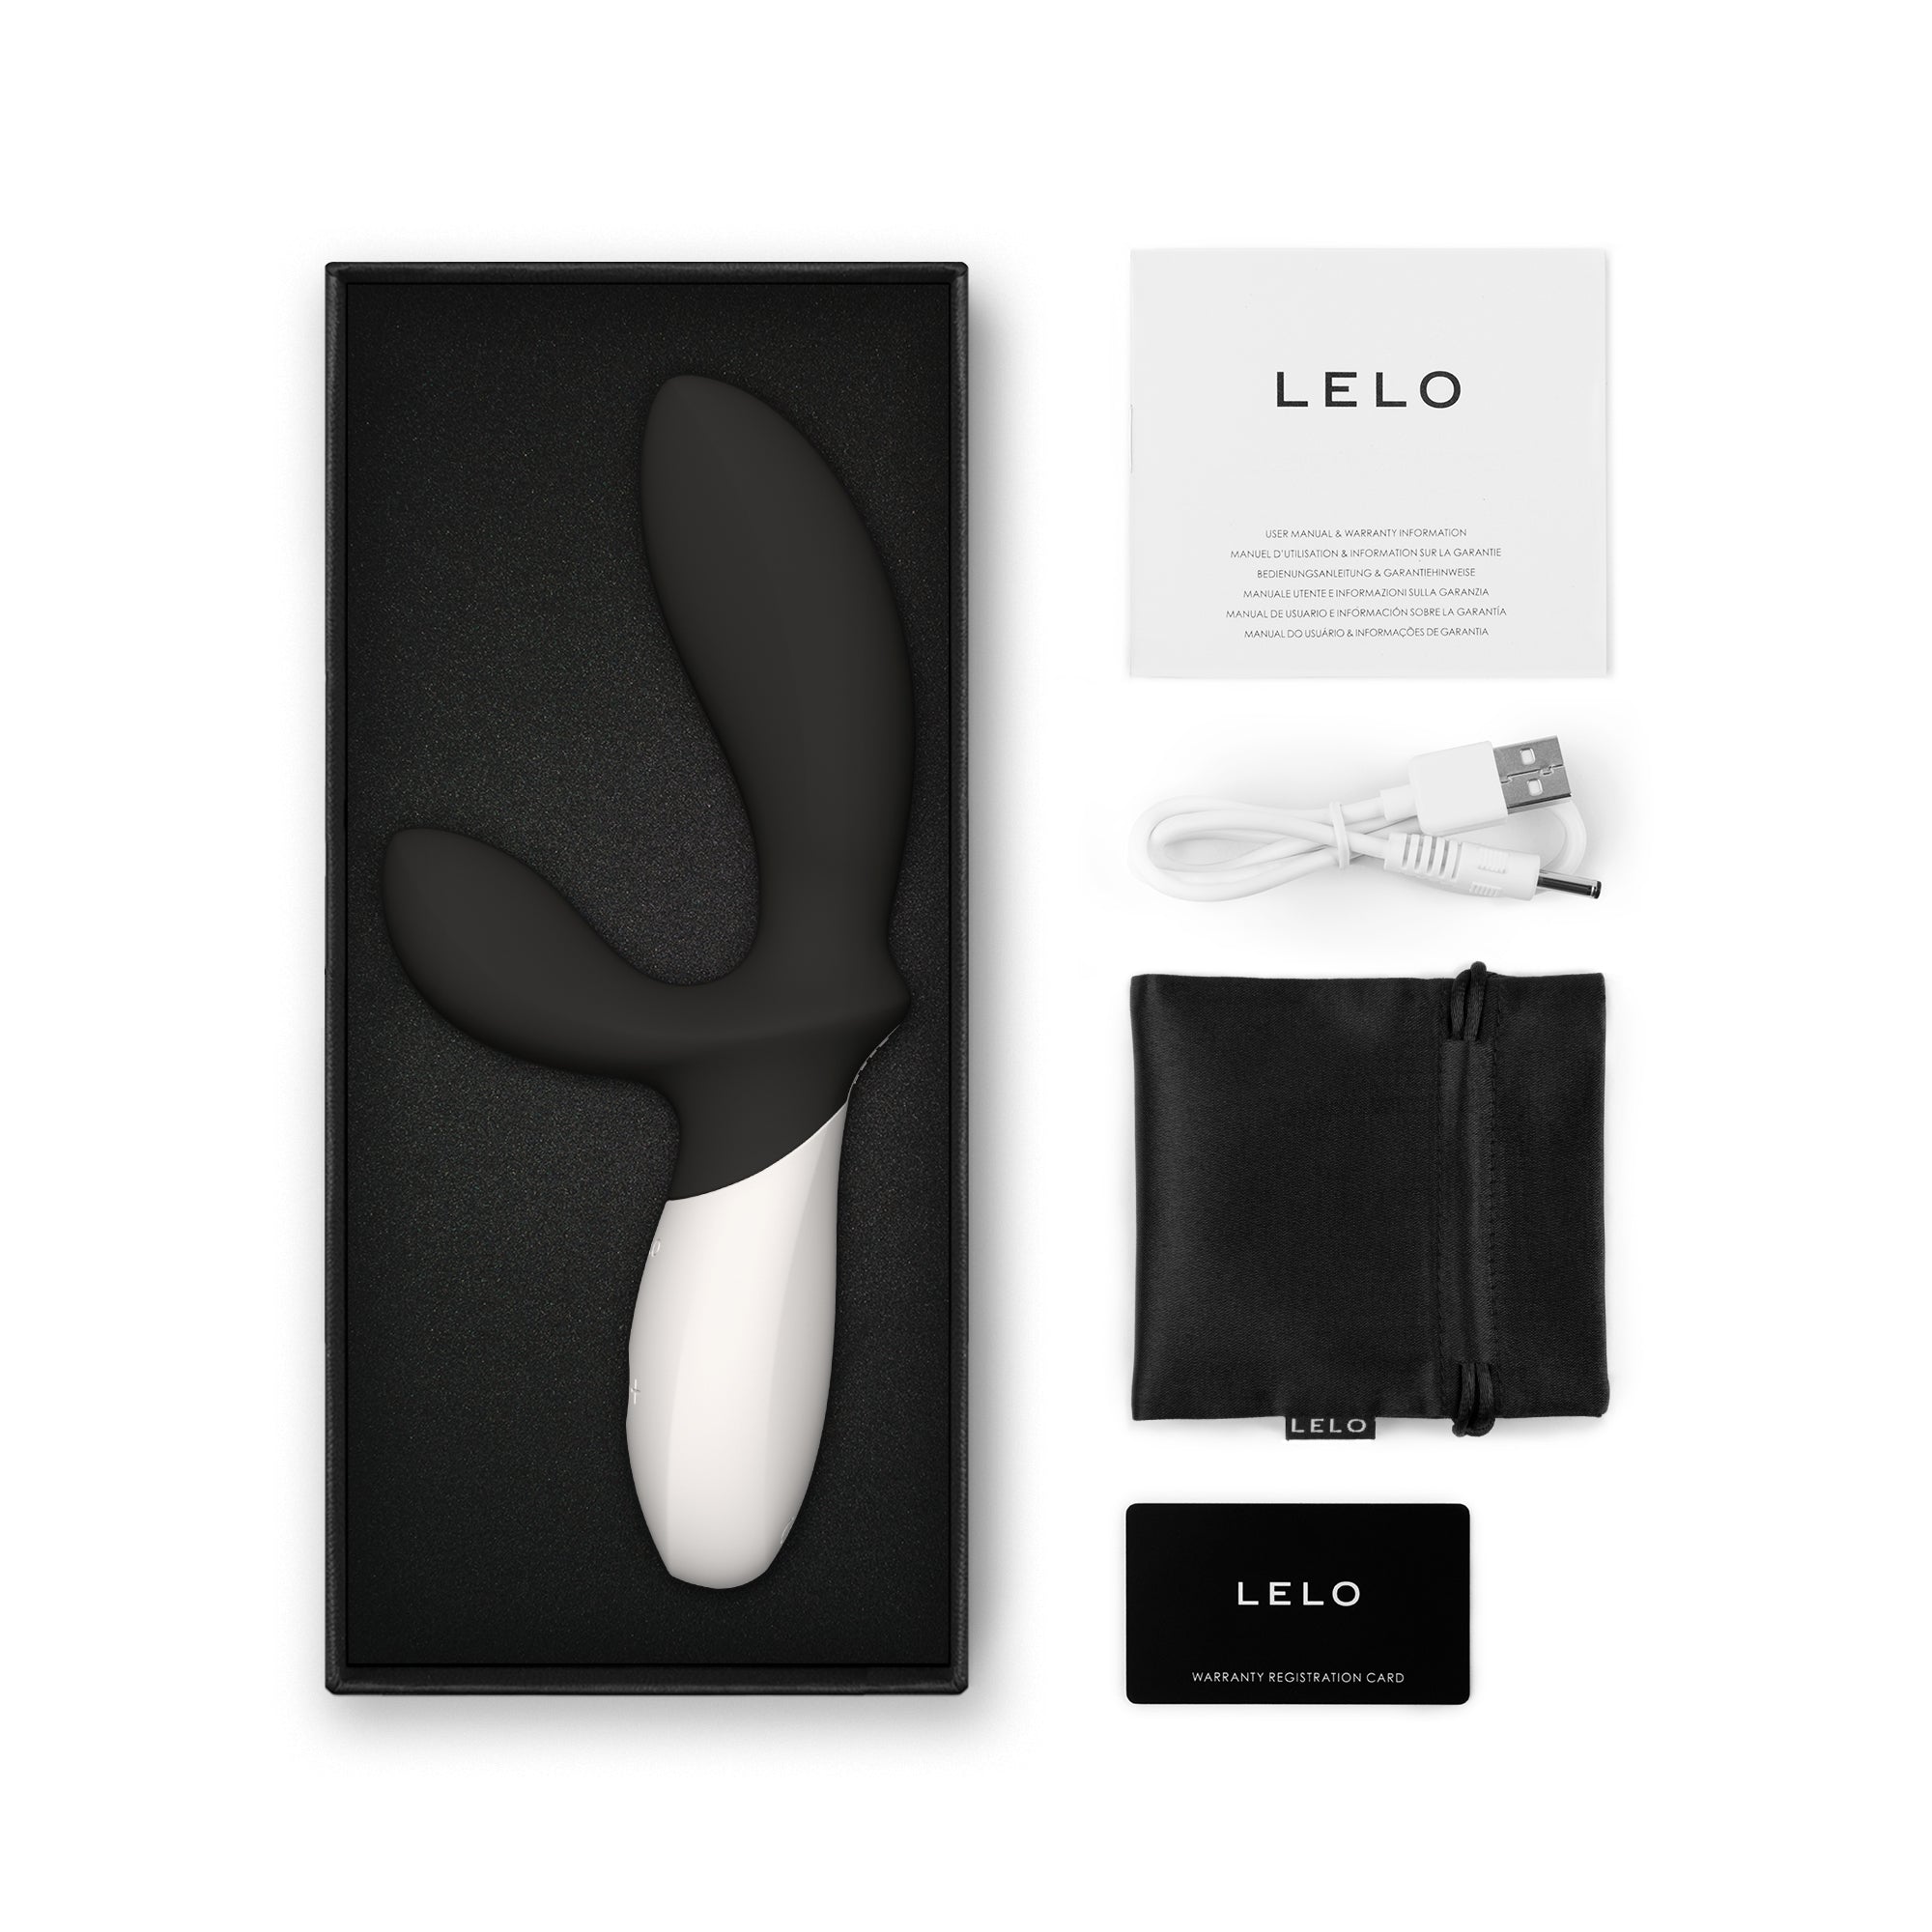 LeLo Loki Wave 2 Black Prostrate Massager shown in an Open-box presentation with USB charging cable